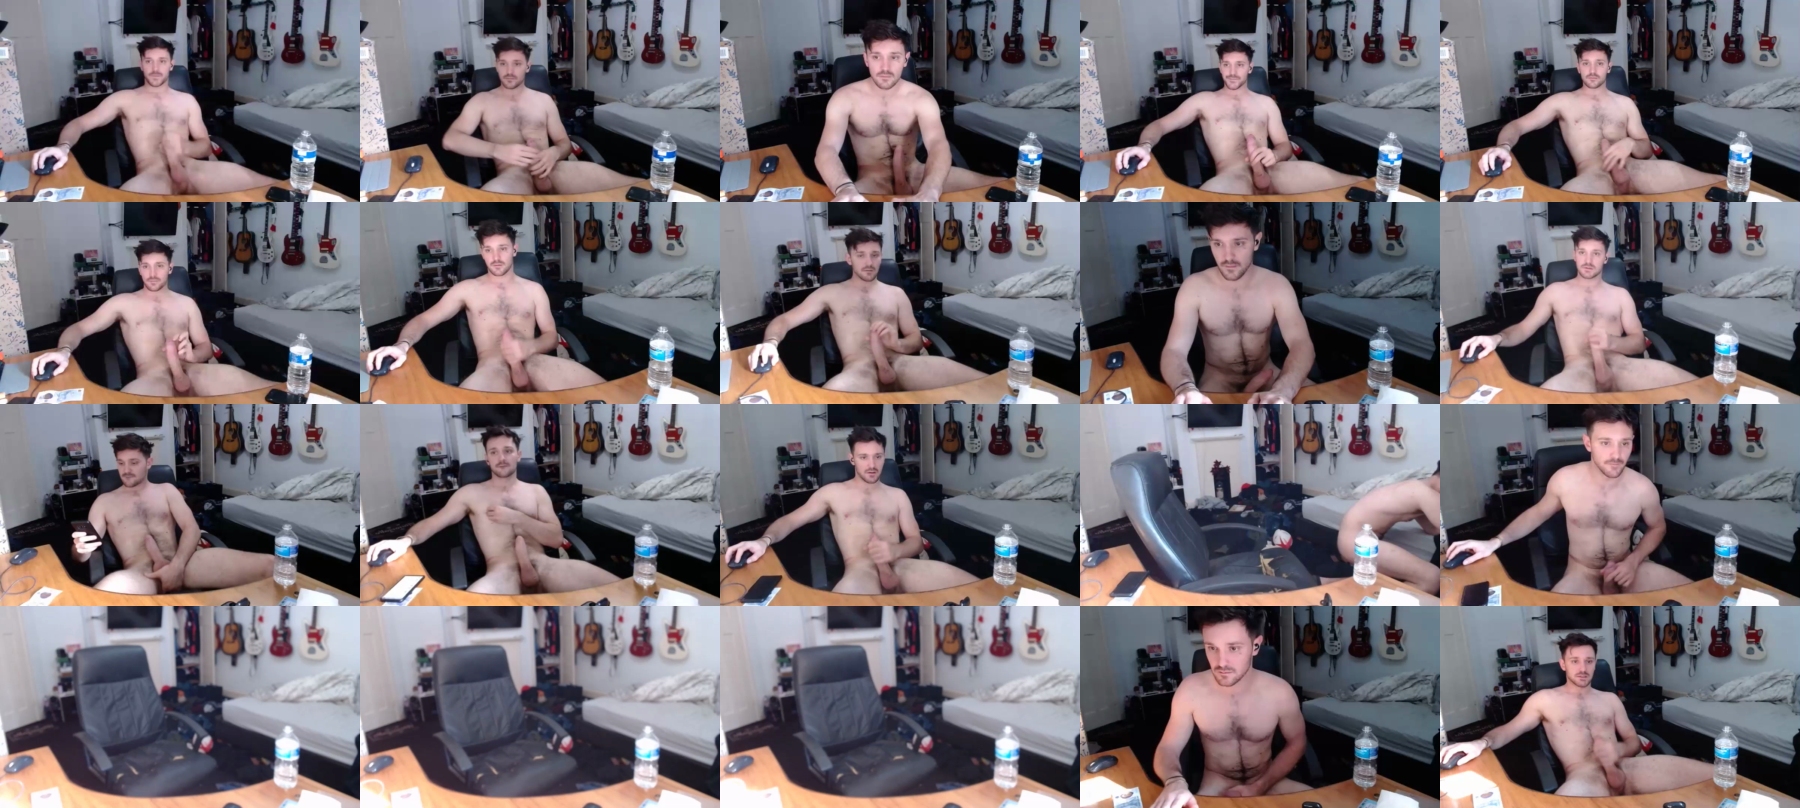 Rugbyboy94 Show CAM SHOW @ Chaturbate 14-10-2021